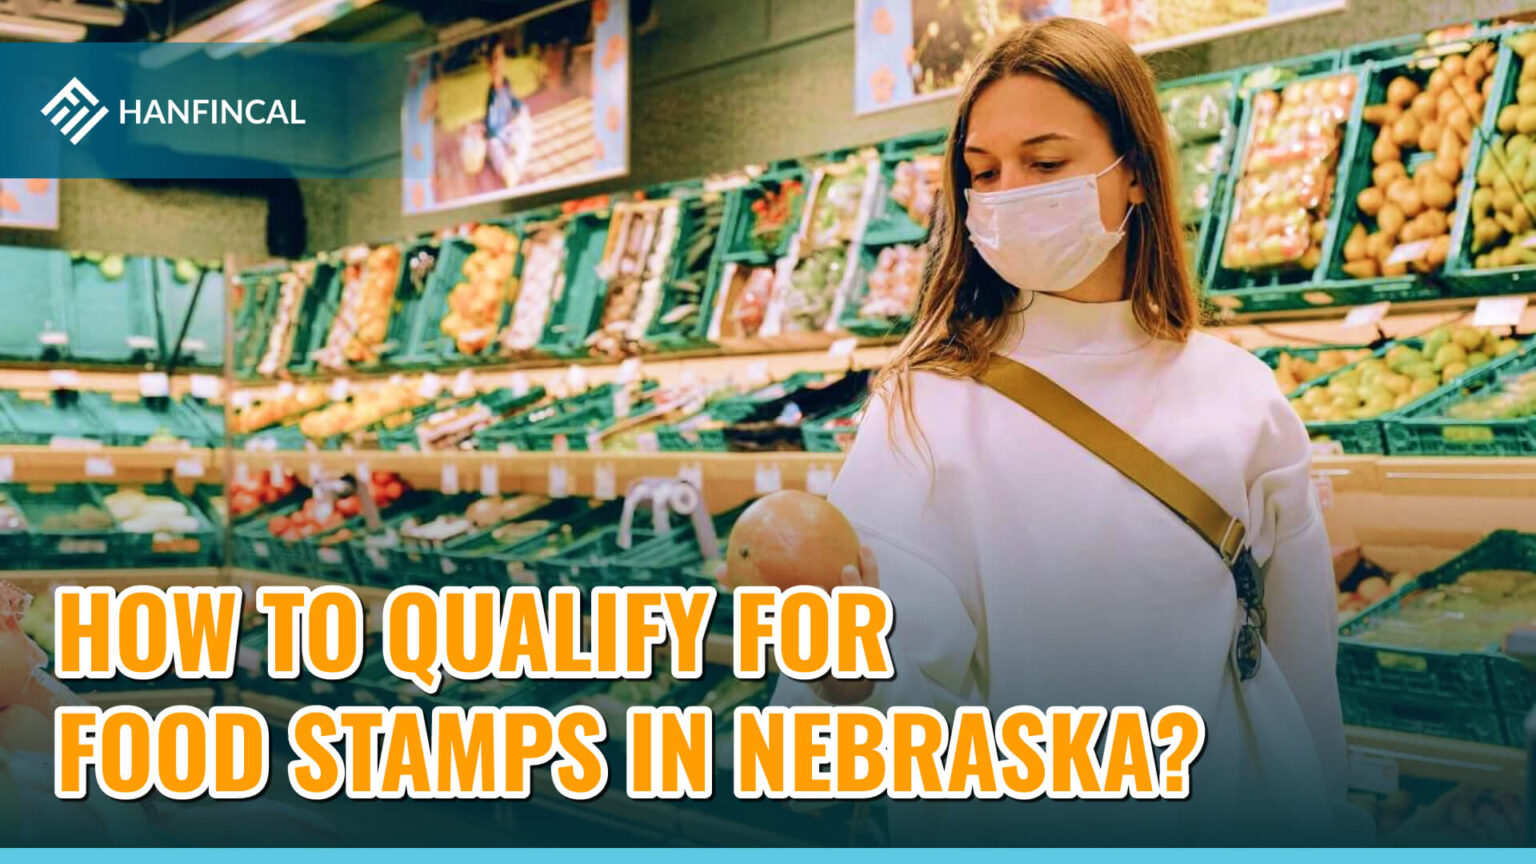 How To Apply For Food Stamps In Nebraska 022023 Hanfincal 9077